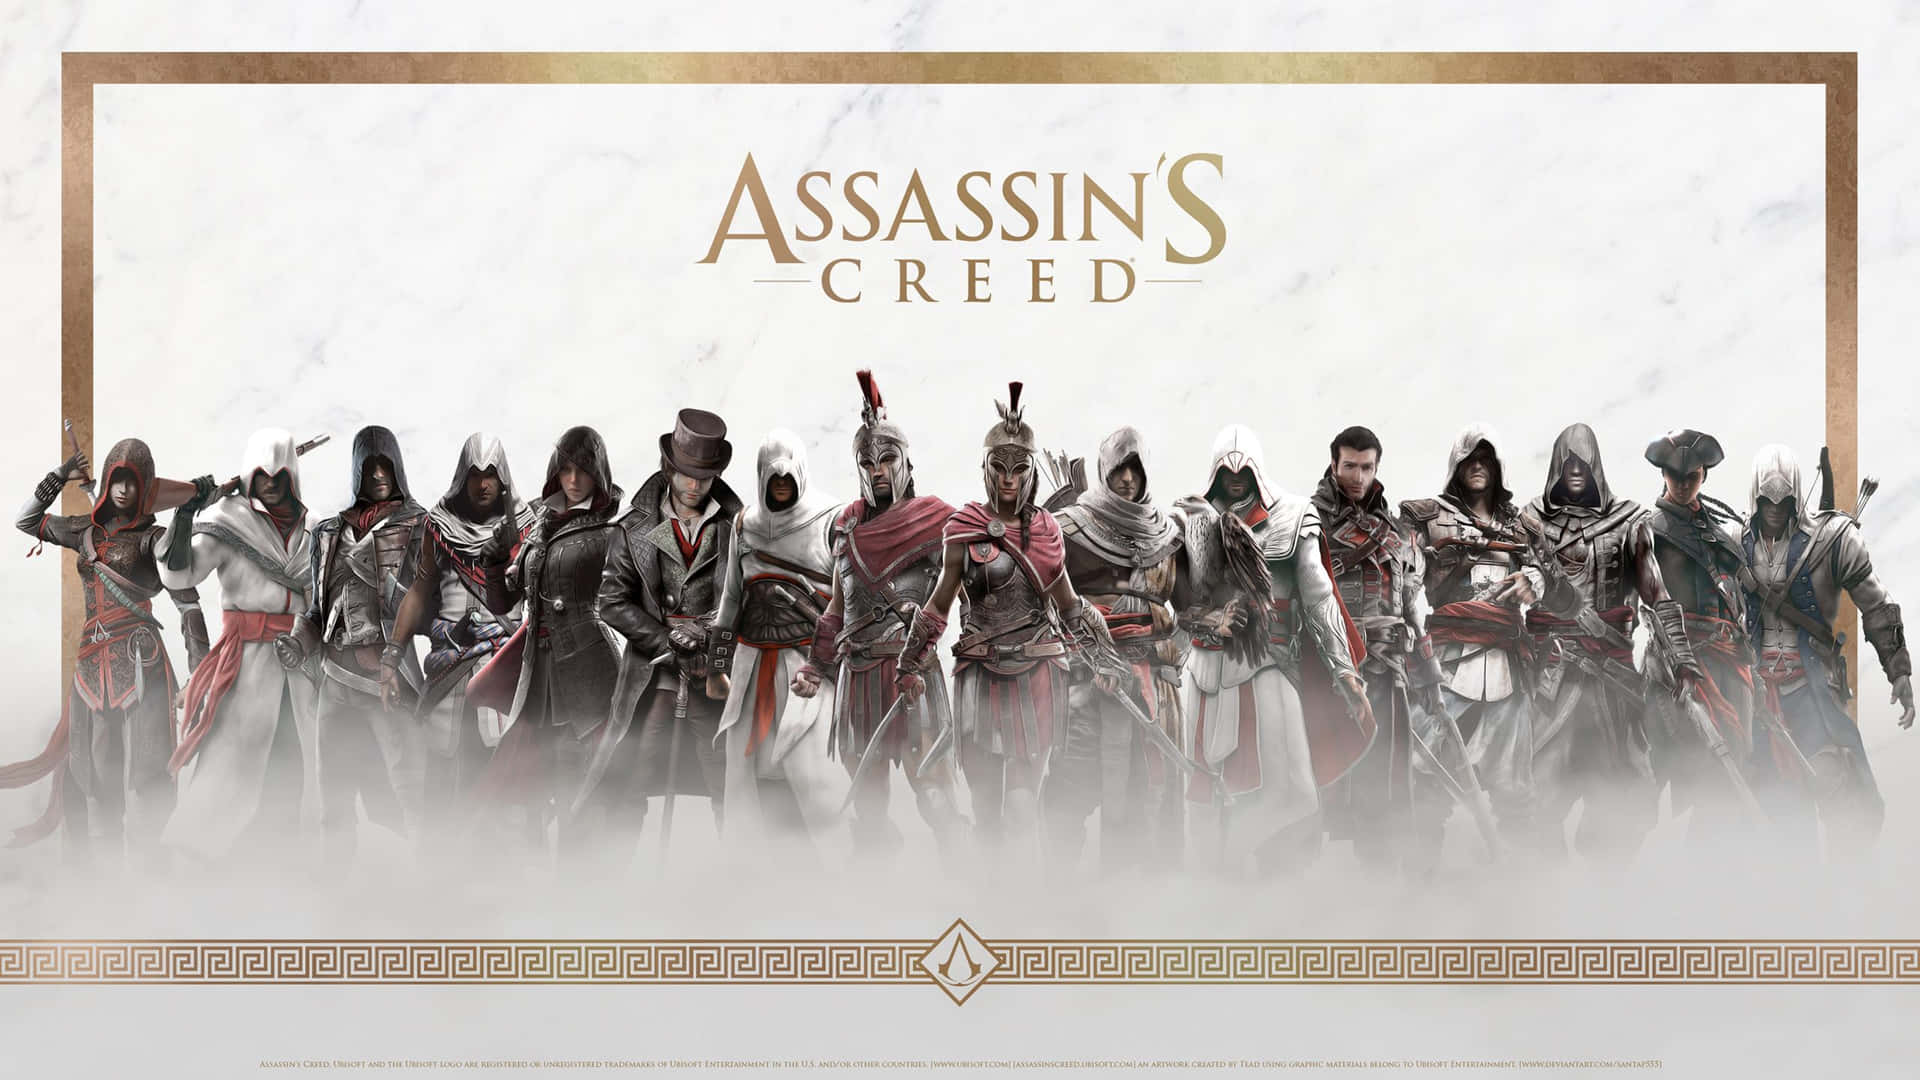 Assassin's Creed - A Group Of Characters In Front Of A White Background